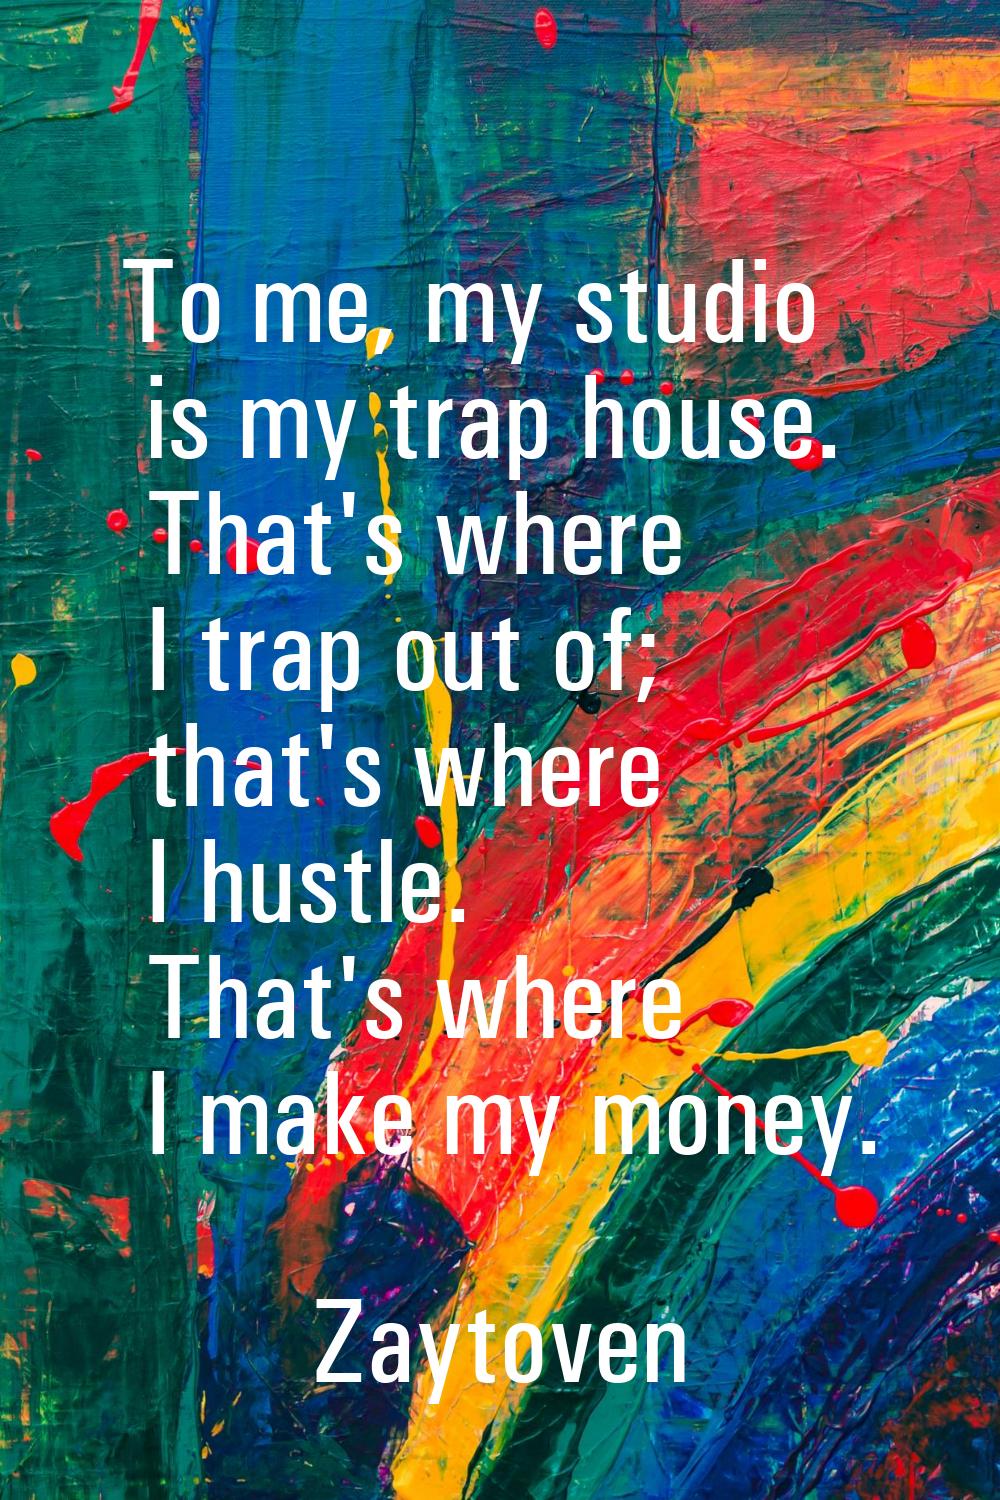 To me, my studio is my trap house. That's where I trap out of; that's where I hustle. That's where 